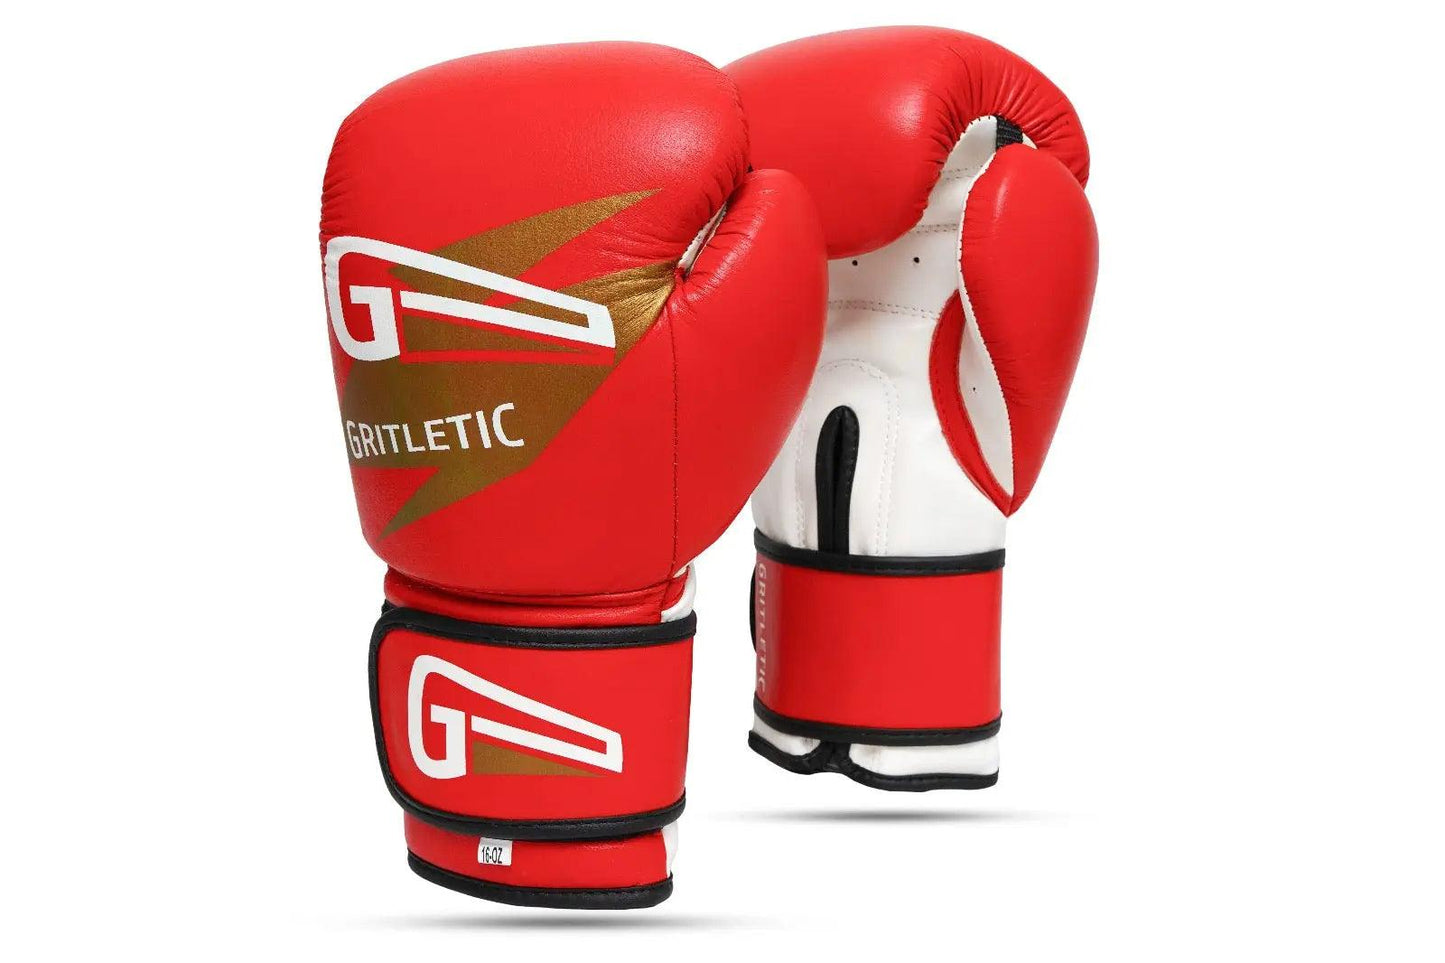 Gritletic Pro Premium Red and White Leather Boxing & MMA Punching Bag Gloves - Gritleticstore